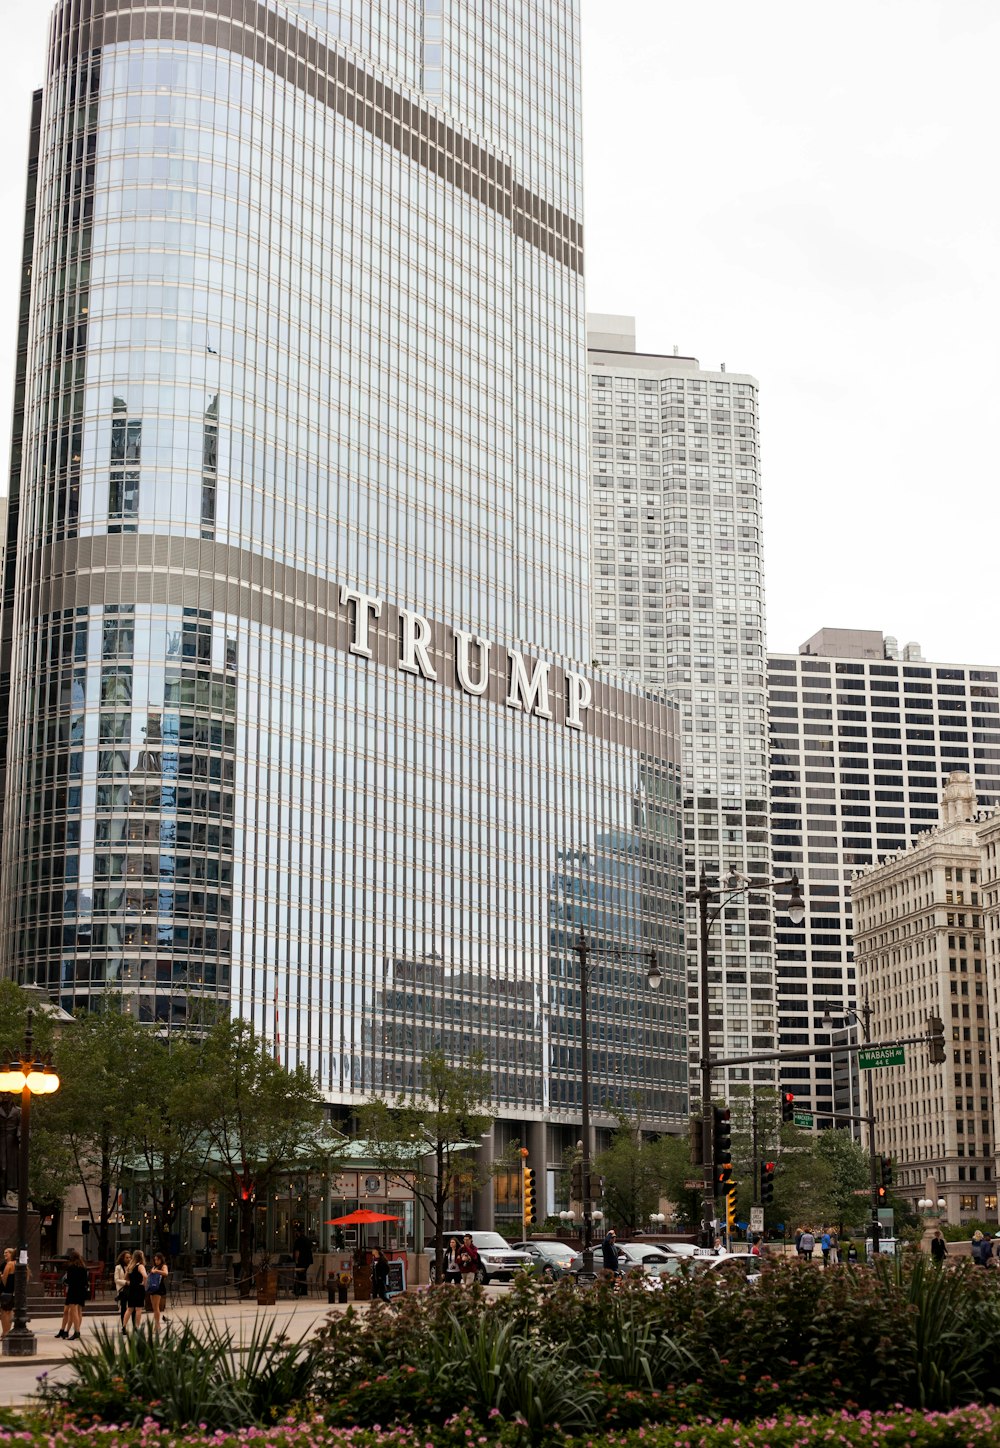 Trump building during daytime